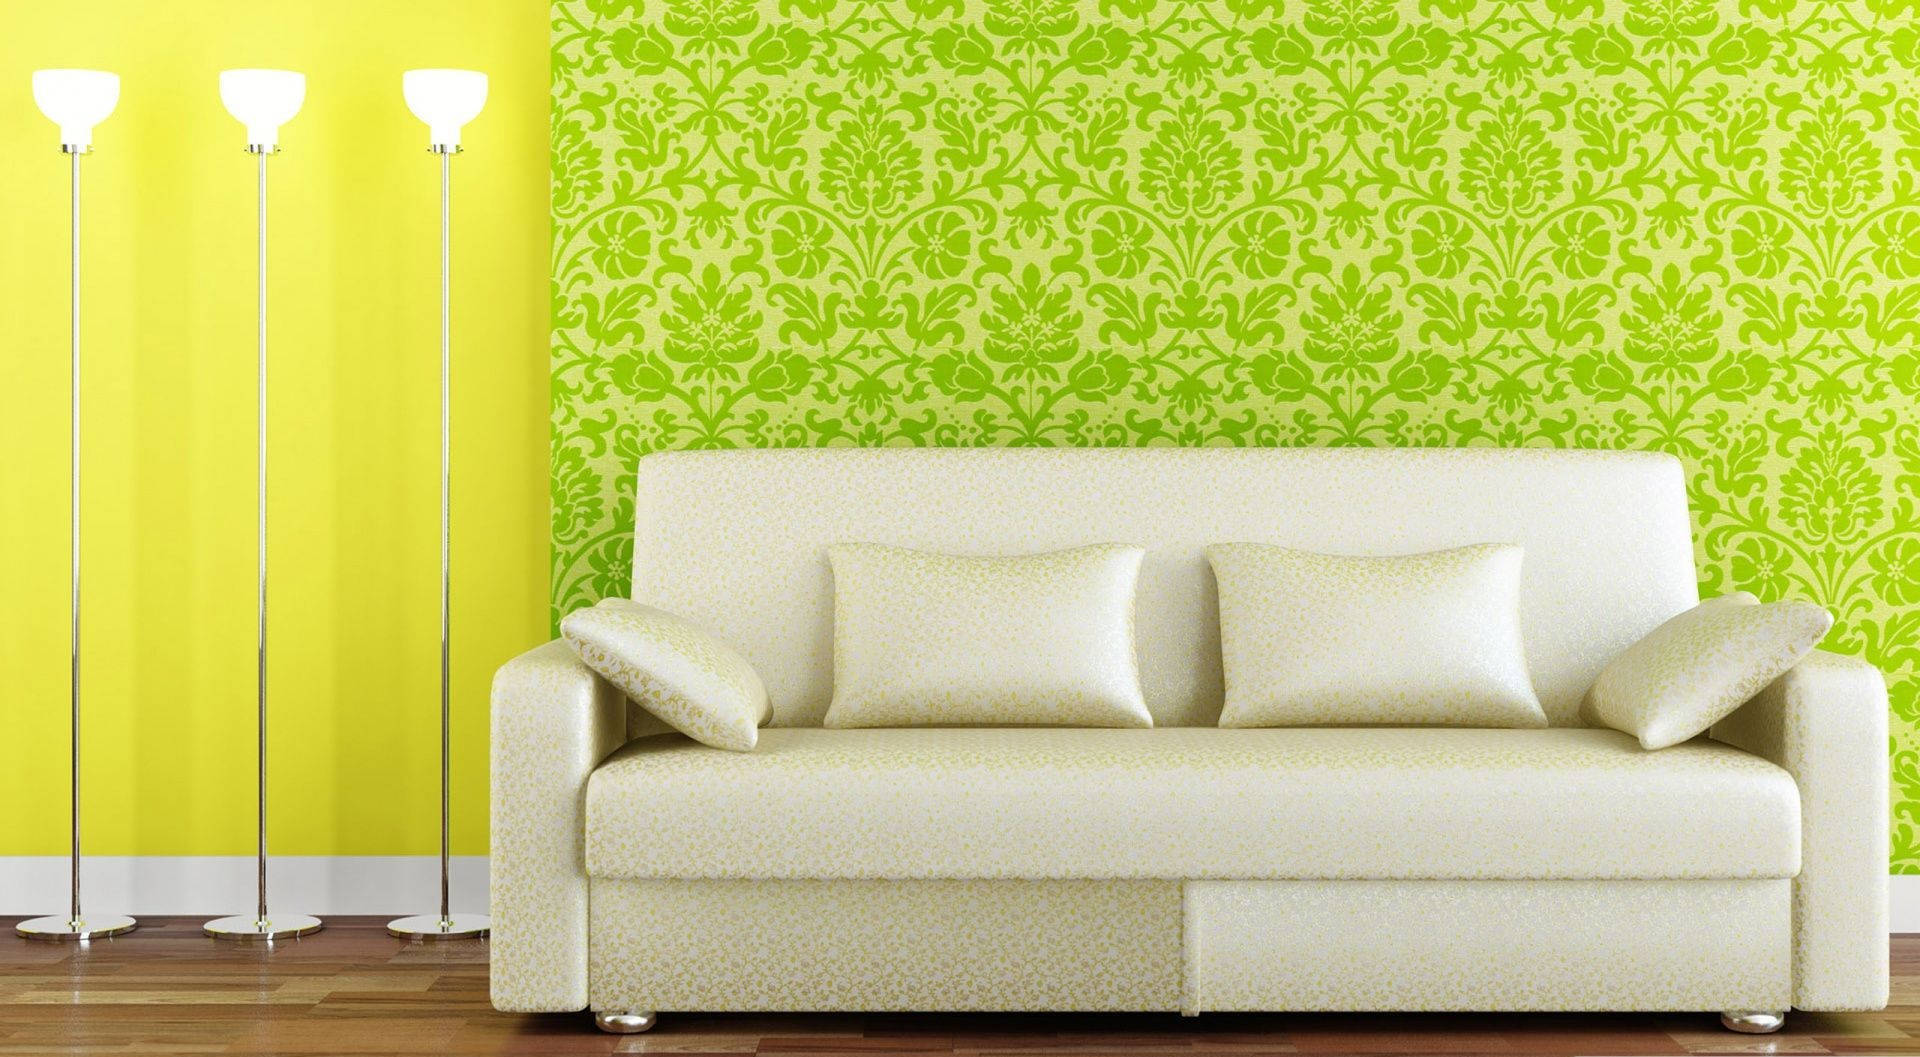 Living Room With Green Wallpaper Wallpaper